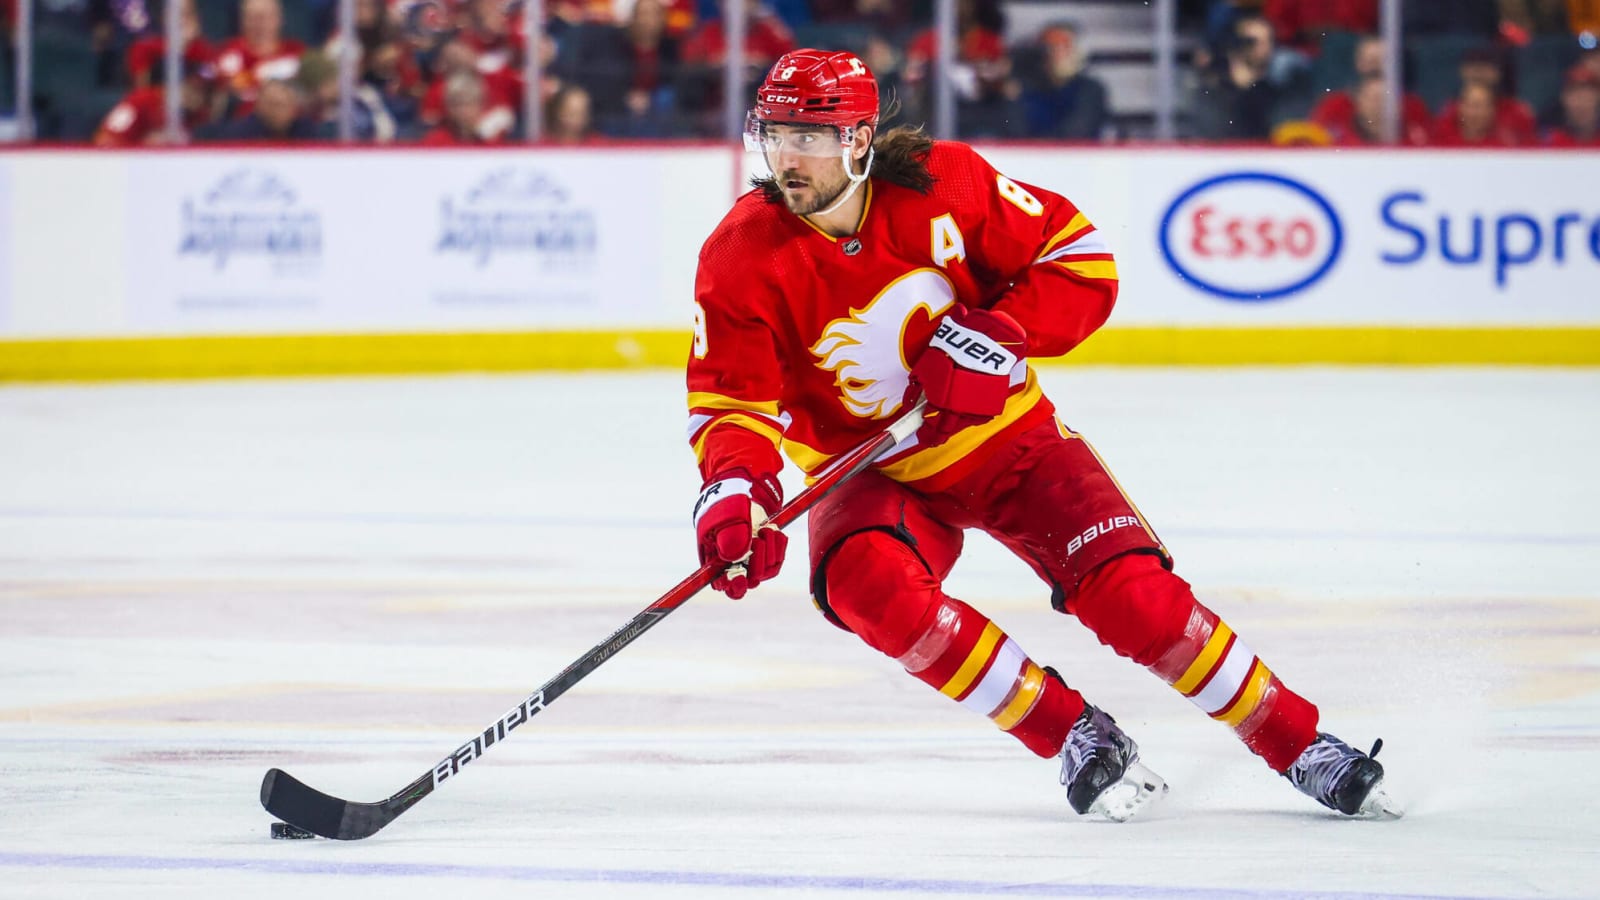 Insider Trading: The Dallas Stars are the front-runners for Chris Tanev